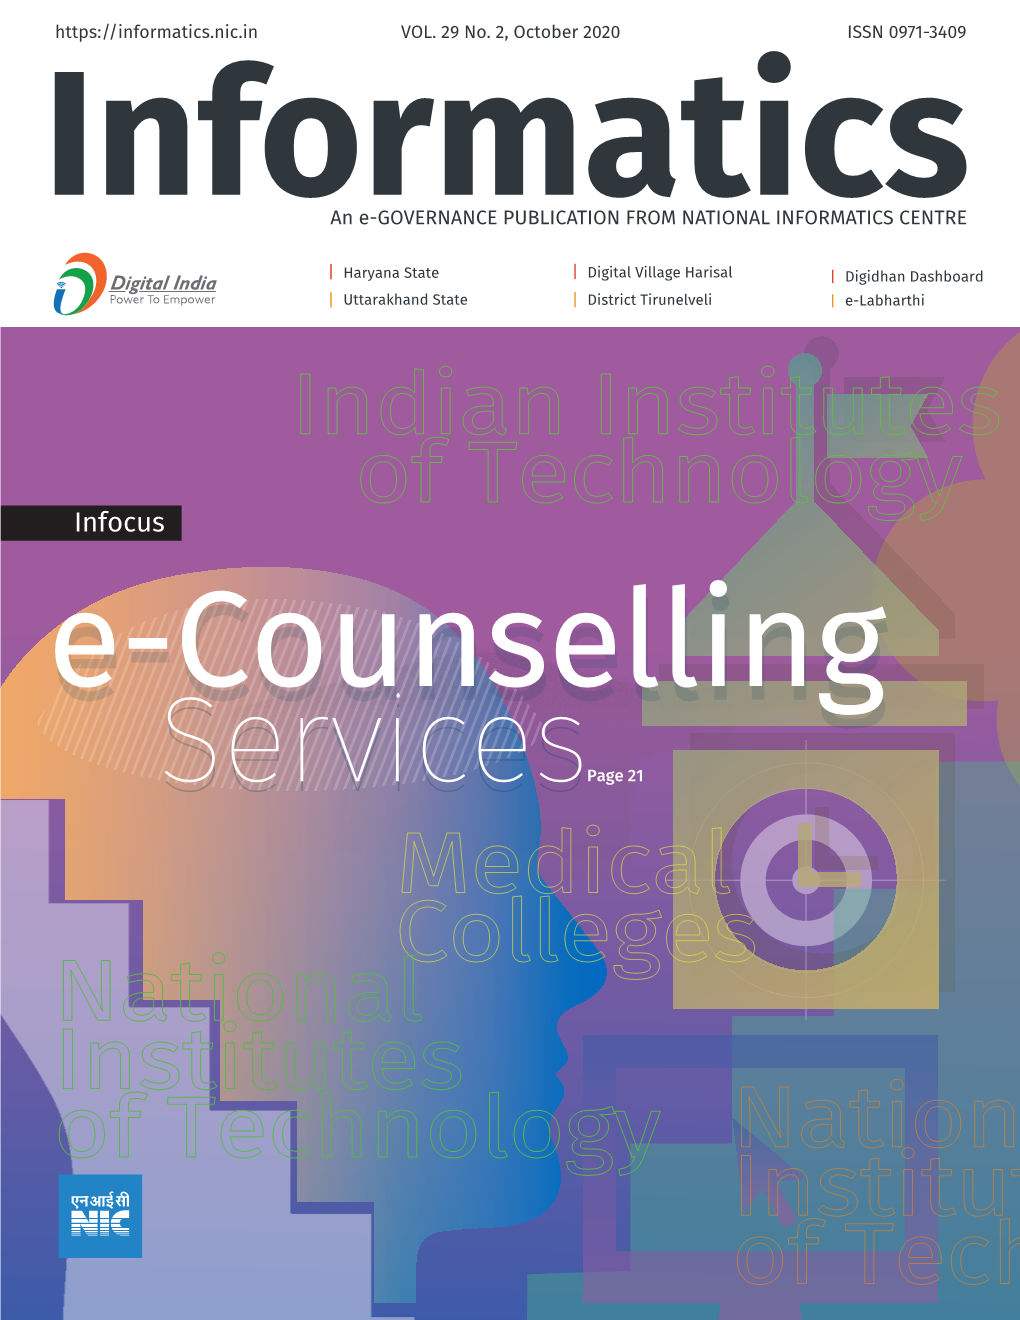 Infocus E-Counsellinge-Counselling Servicespage 21 Volume 29 No.2, October 2020 Editorial